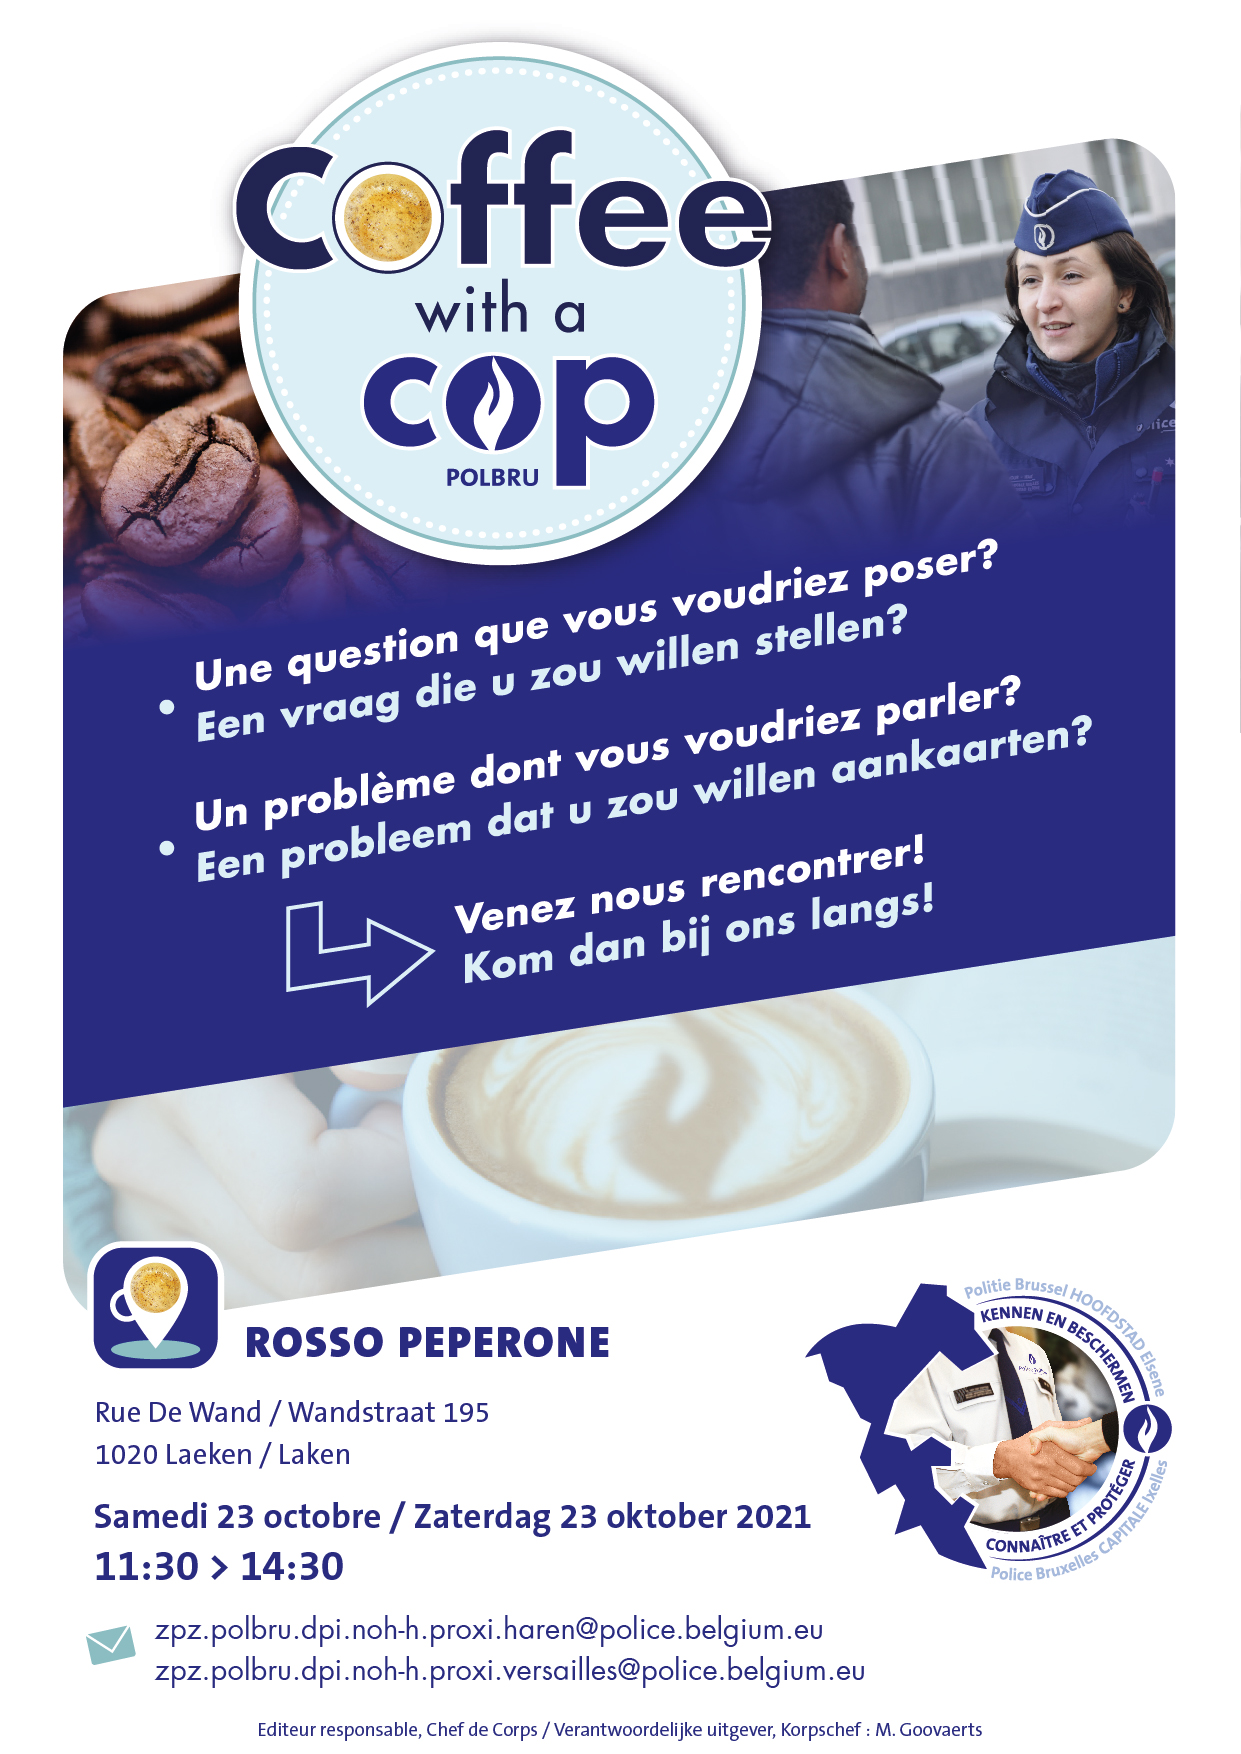 Coffee with a cop - 23-10 Rosso Peperoni